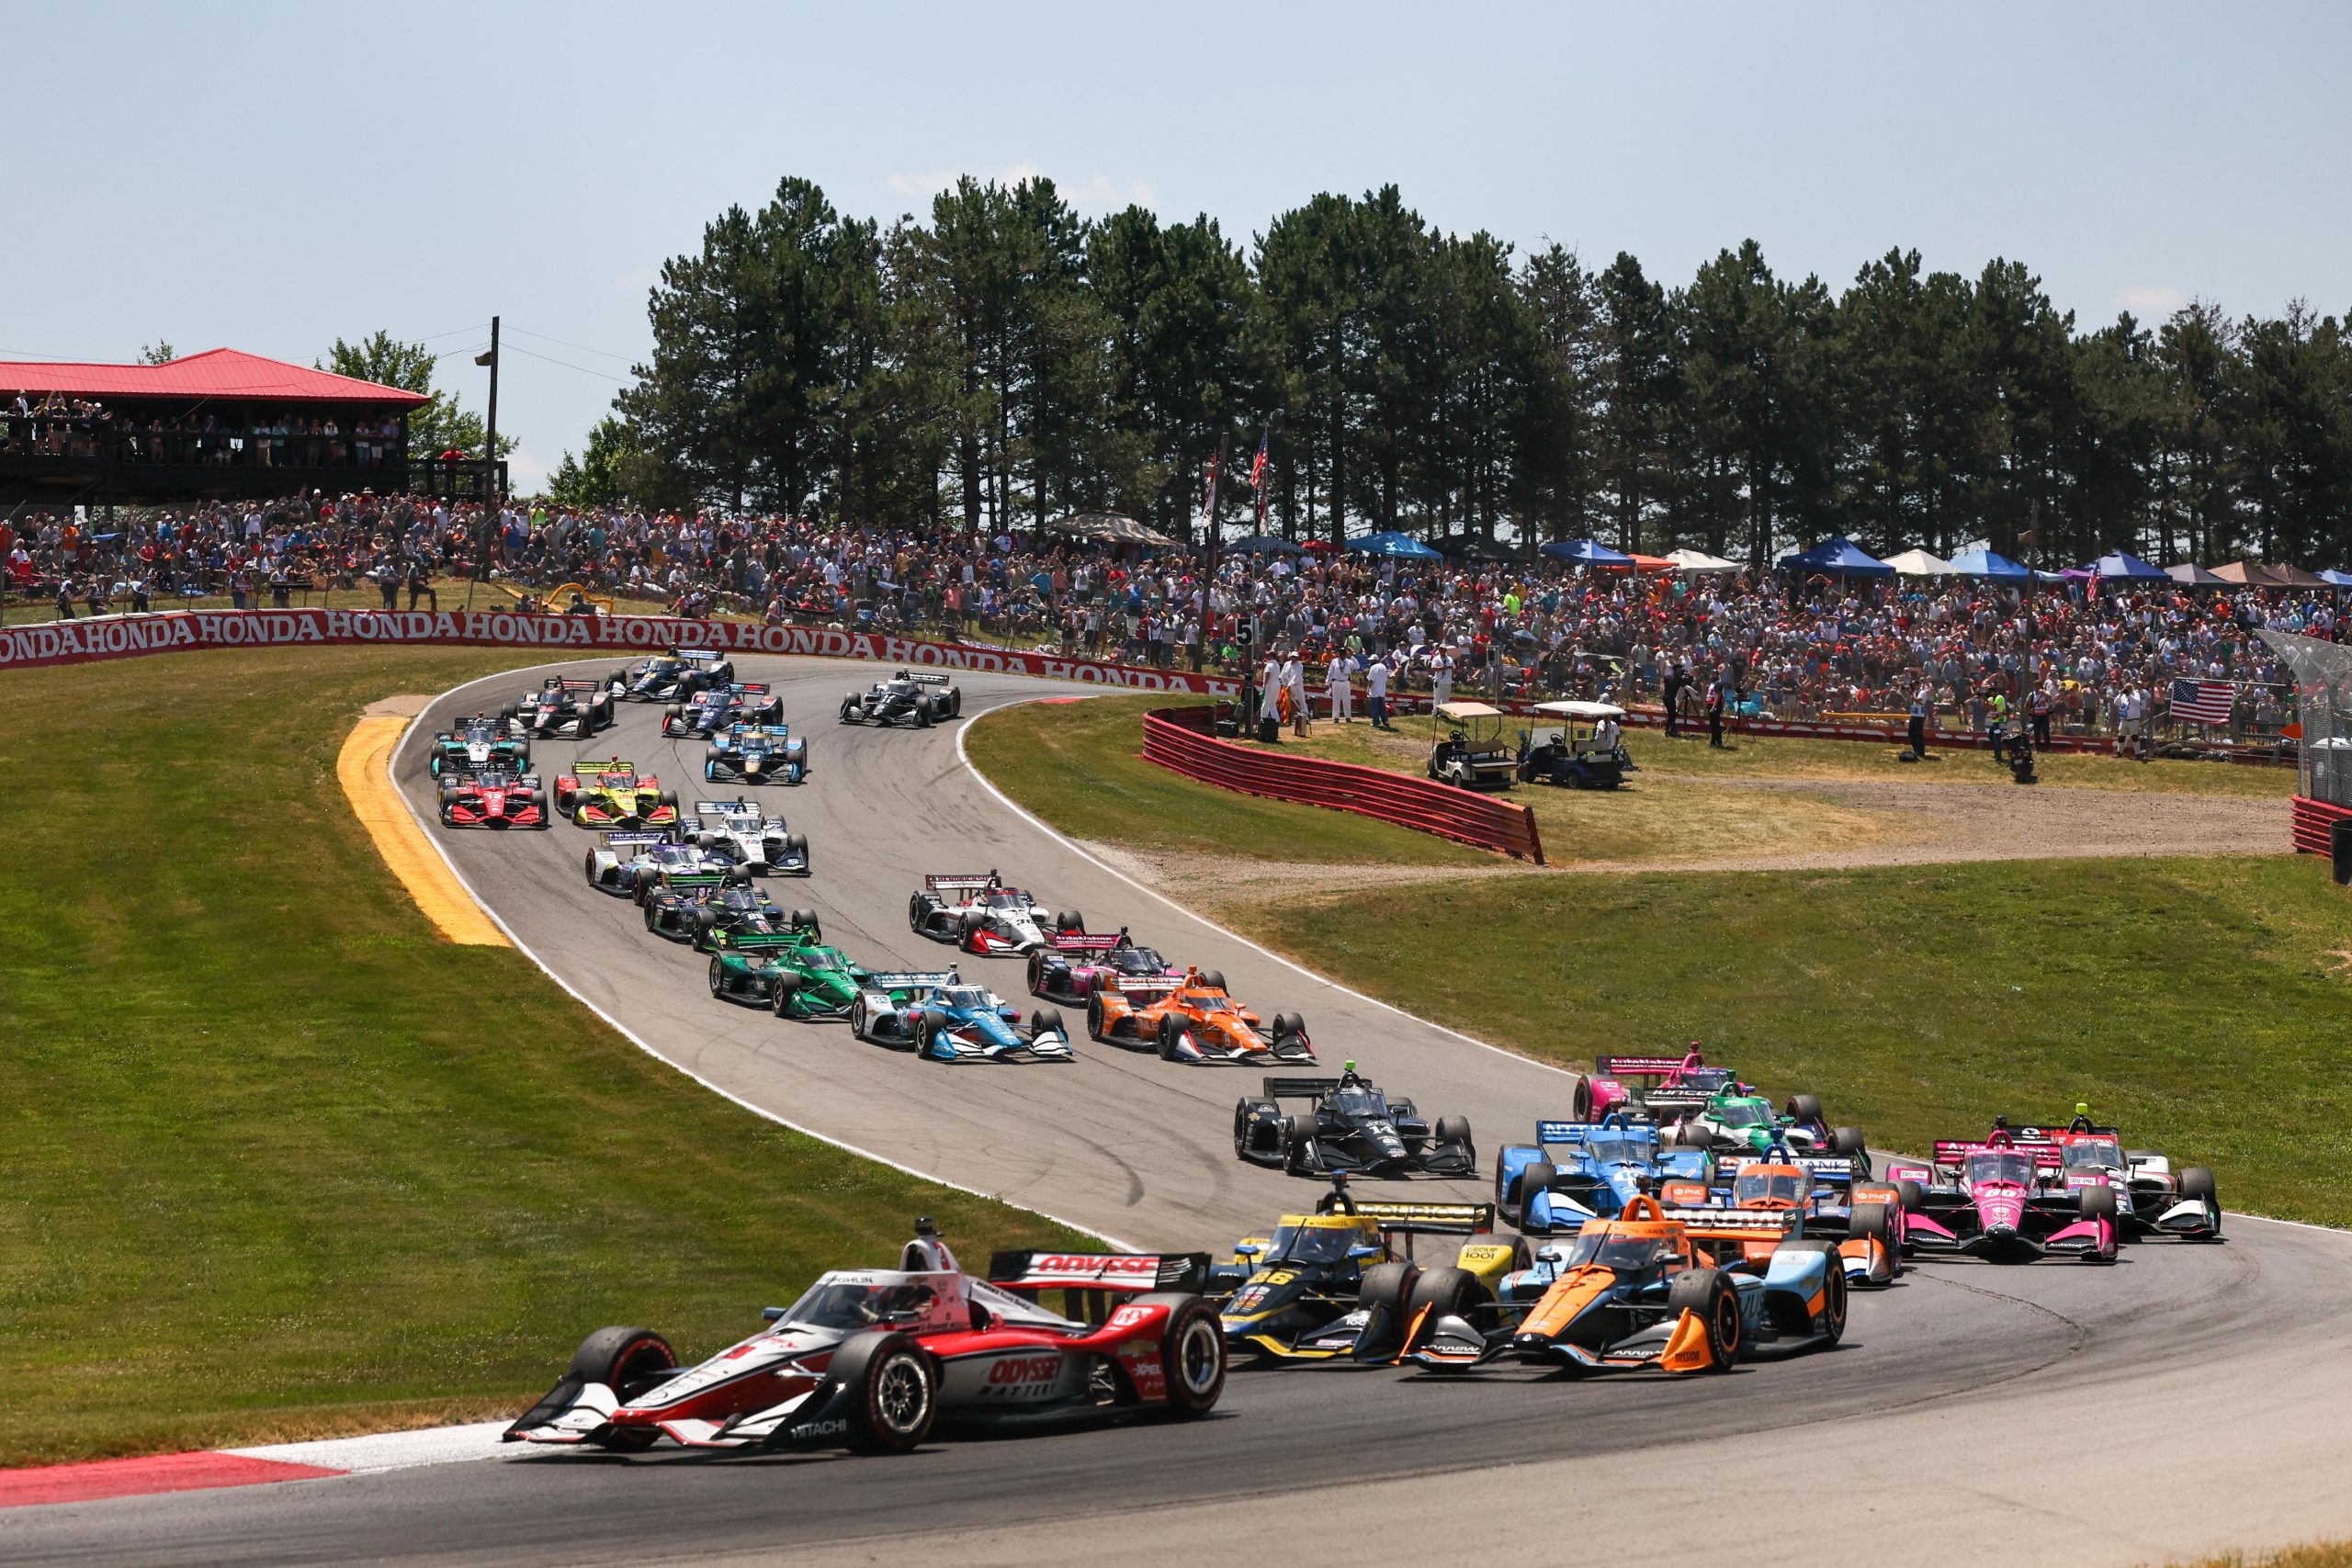 Scott McLaughlin leads the field at the 2022 Honda Indy 200 at Mid-Ohio. (Chris Owens/Penske Entertainment)